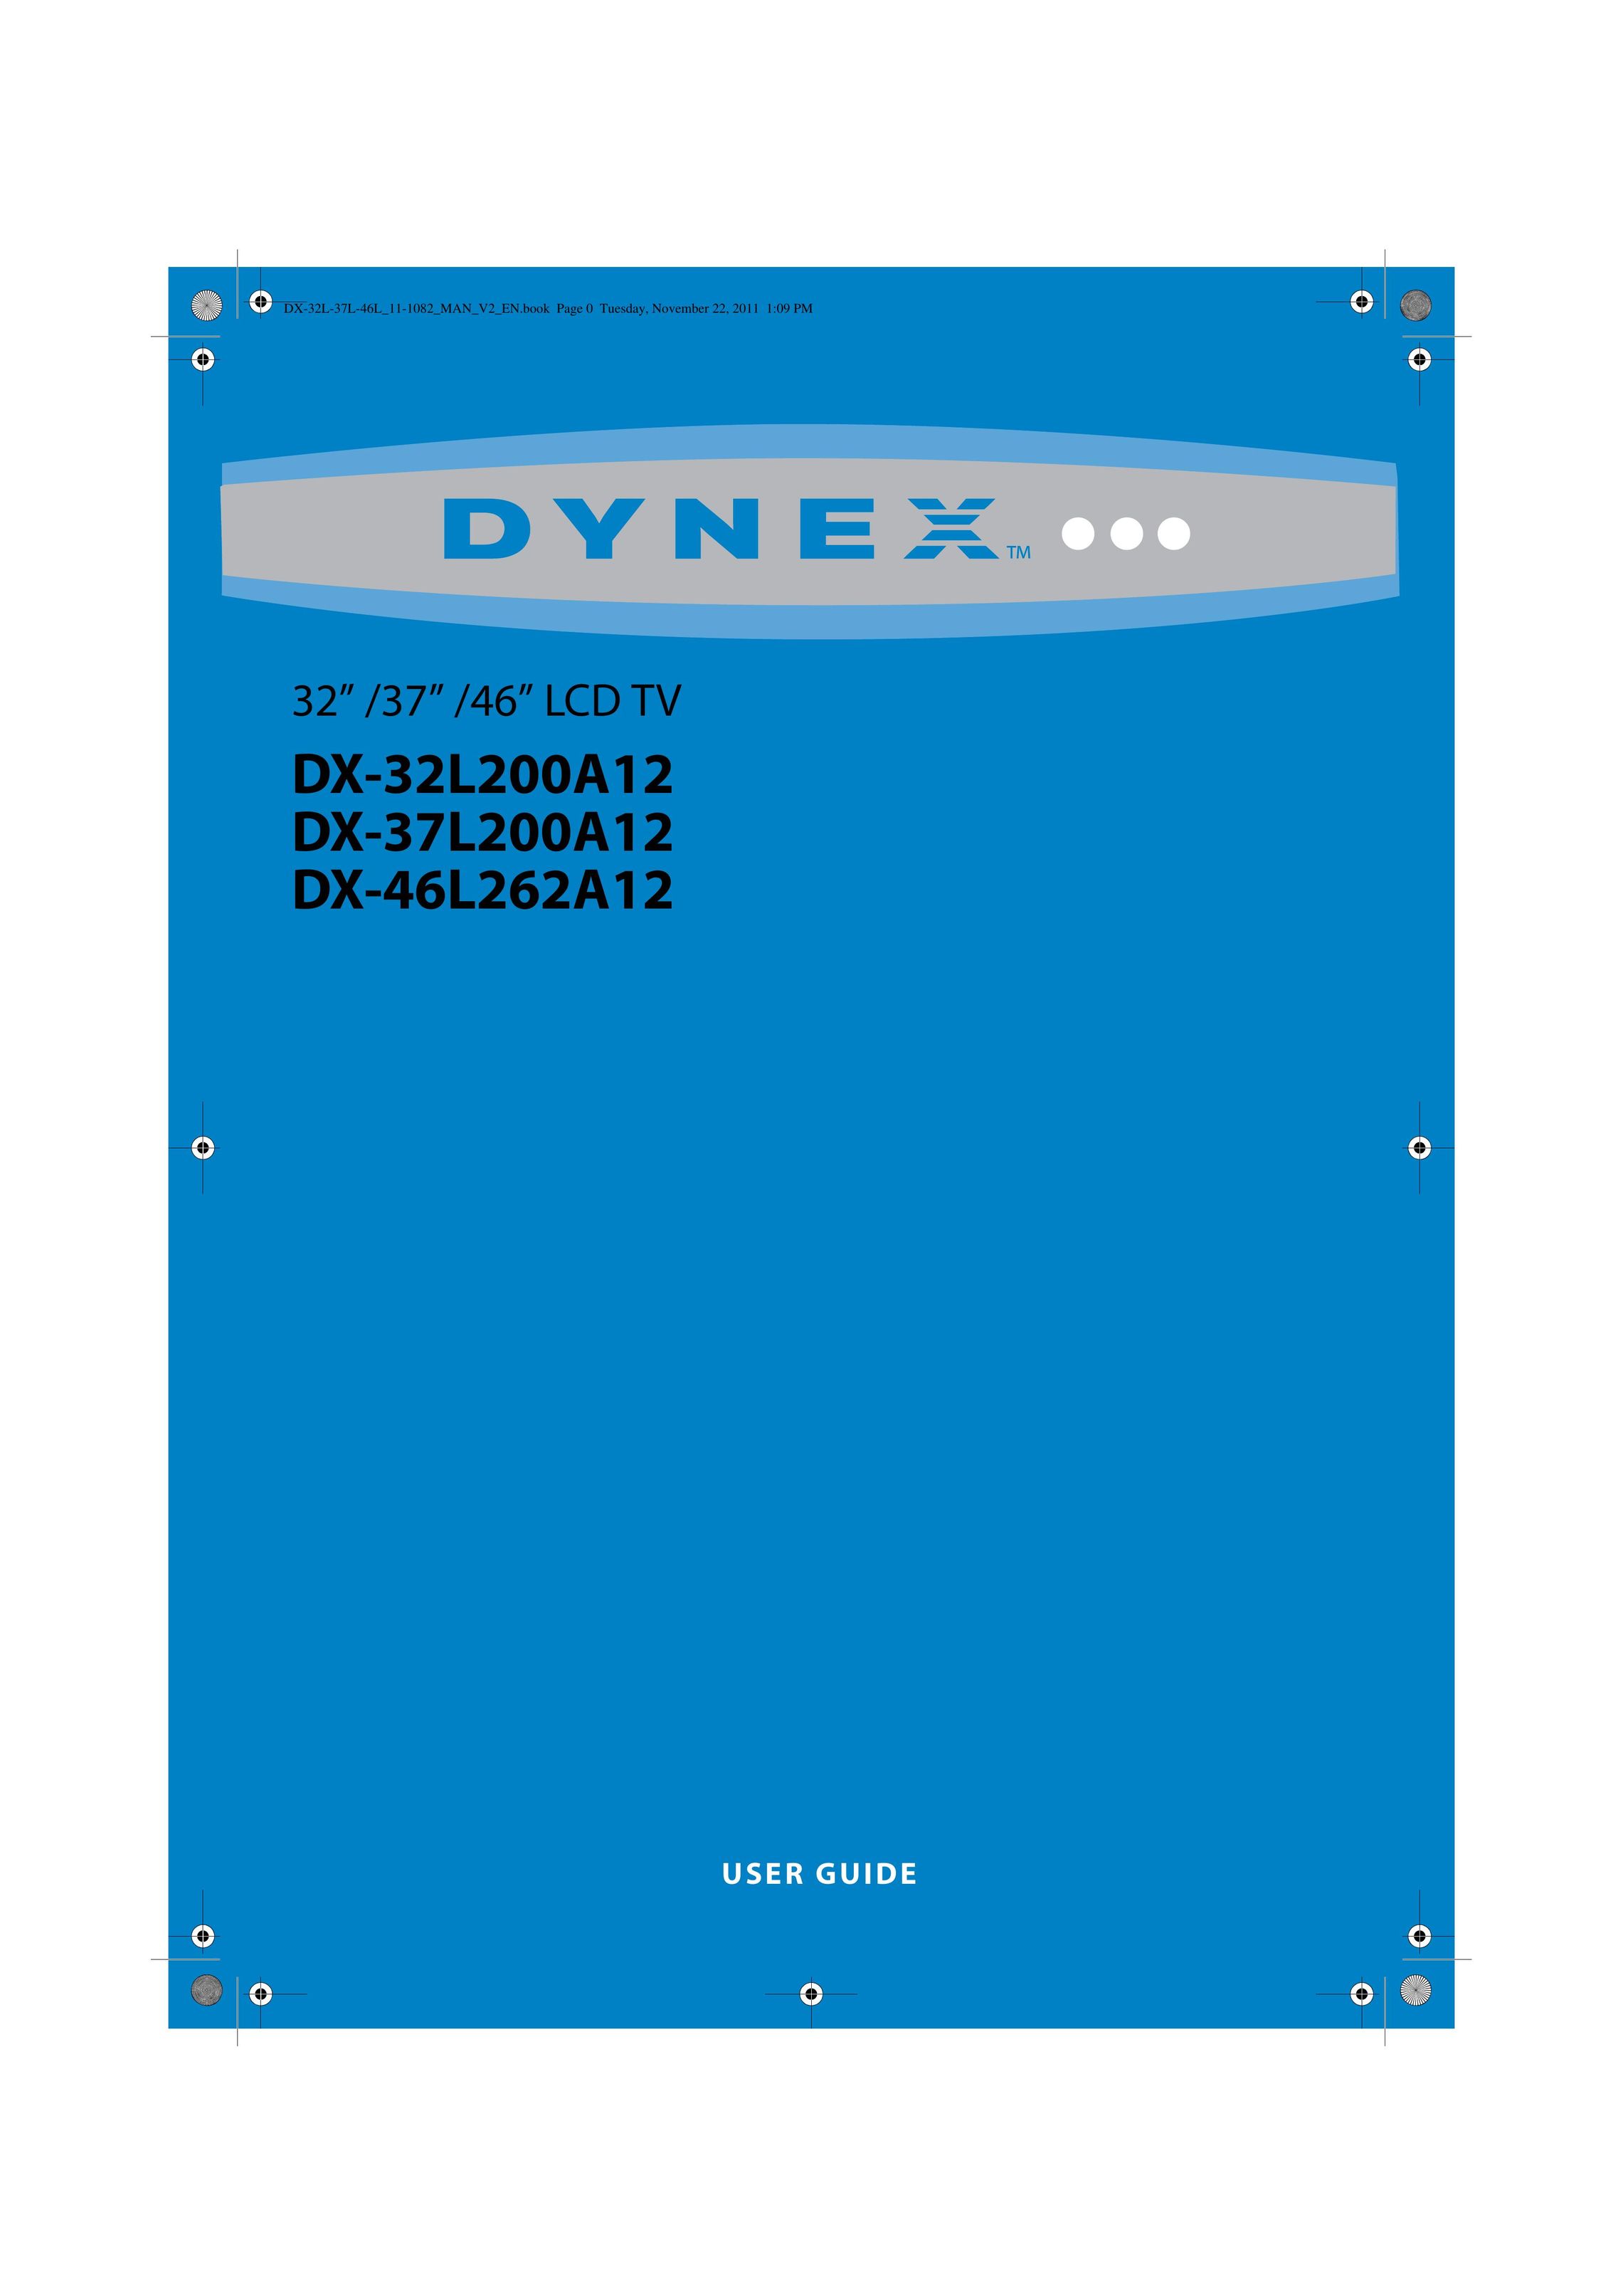 Dynex DX-37L200A12 Home Theater Screen User Manual